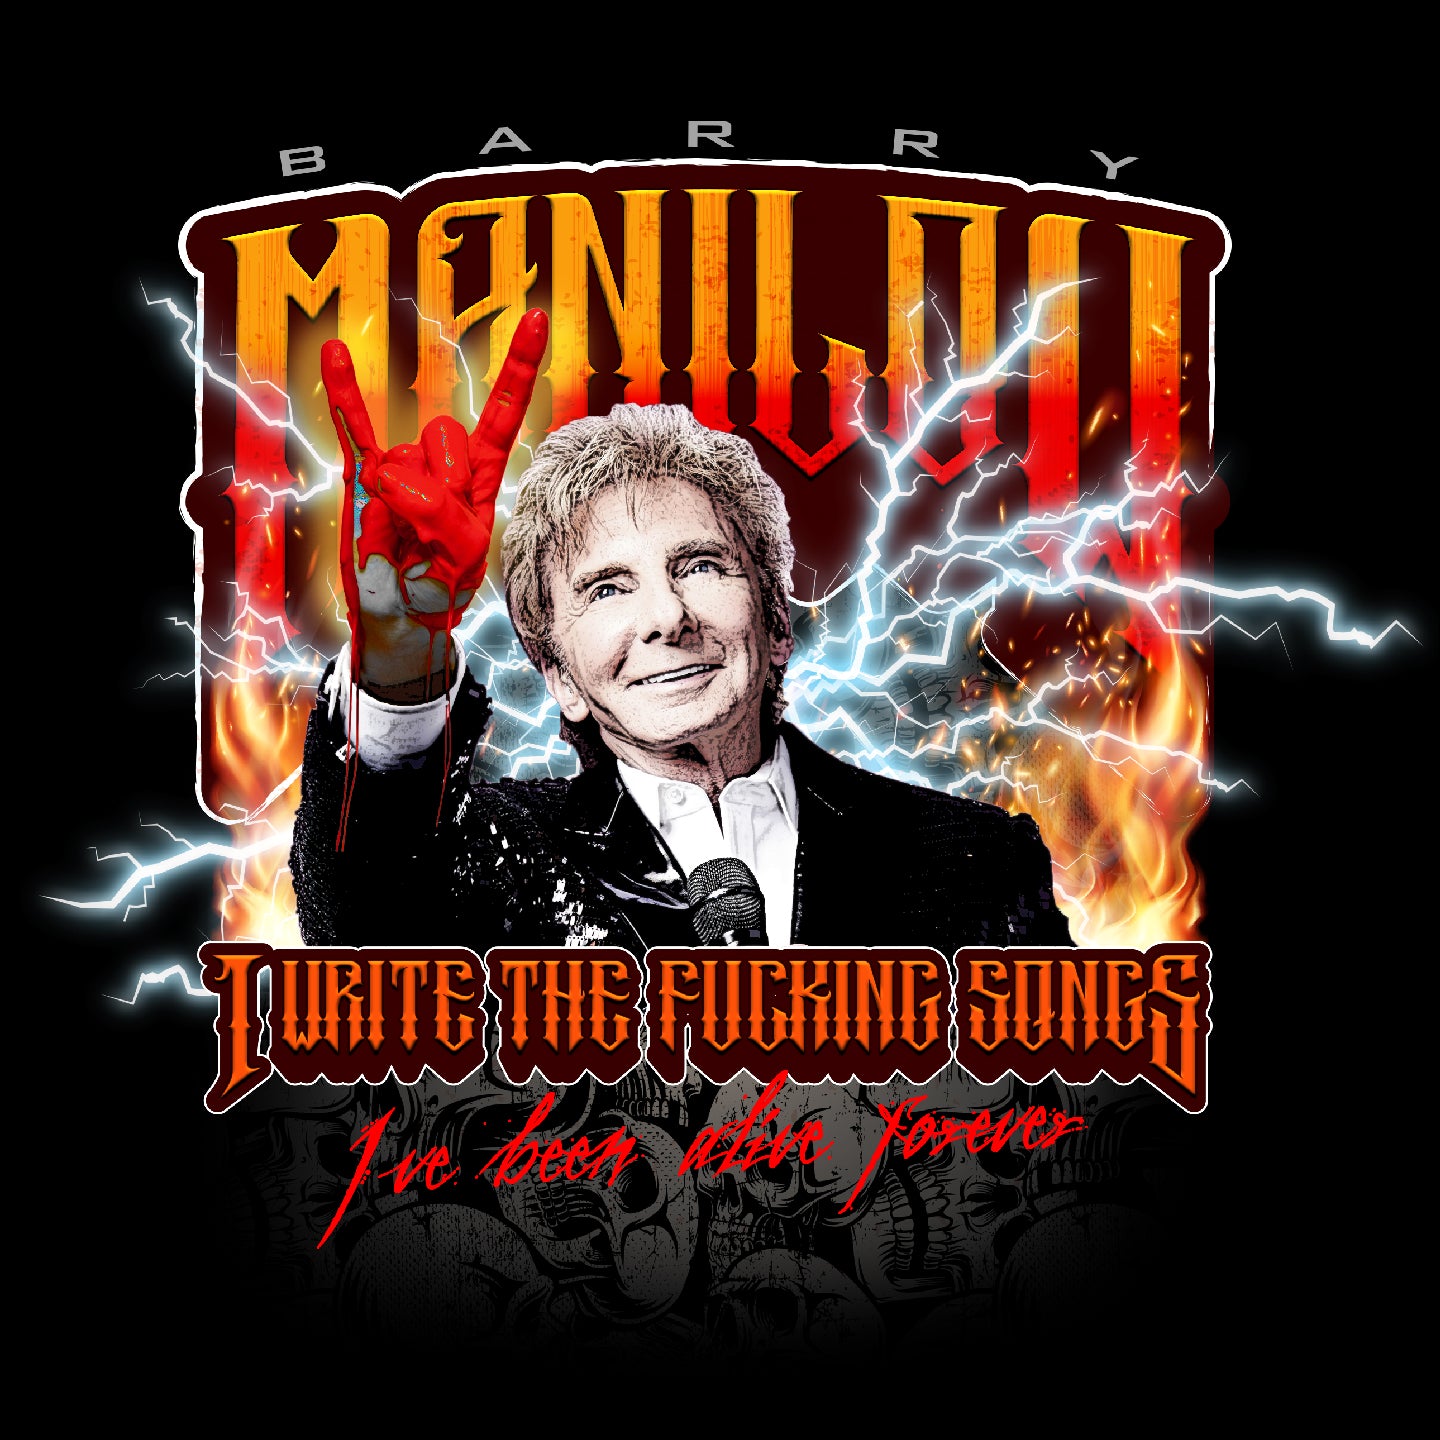 Barry Manilow - I write the f@#king songs